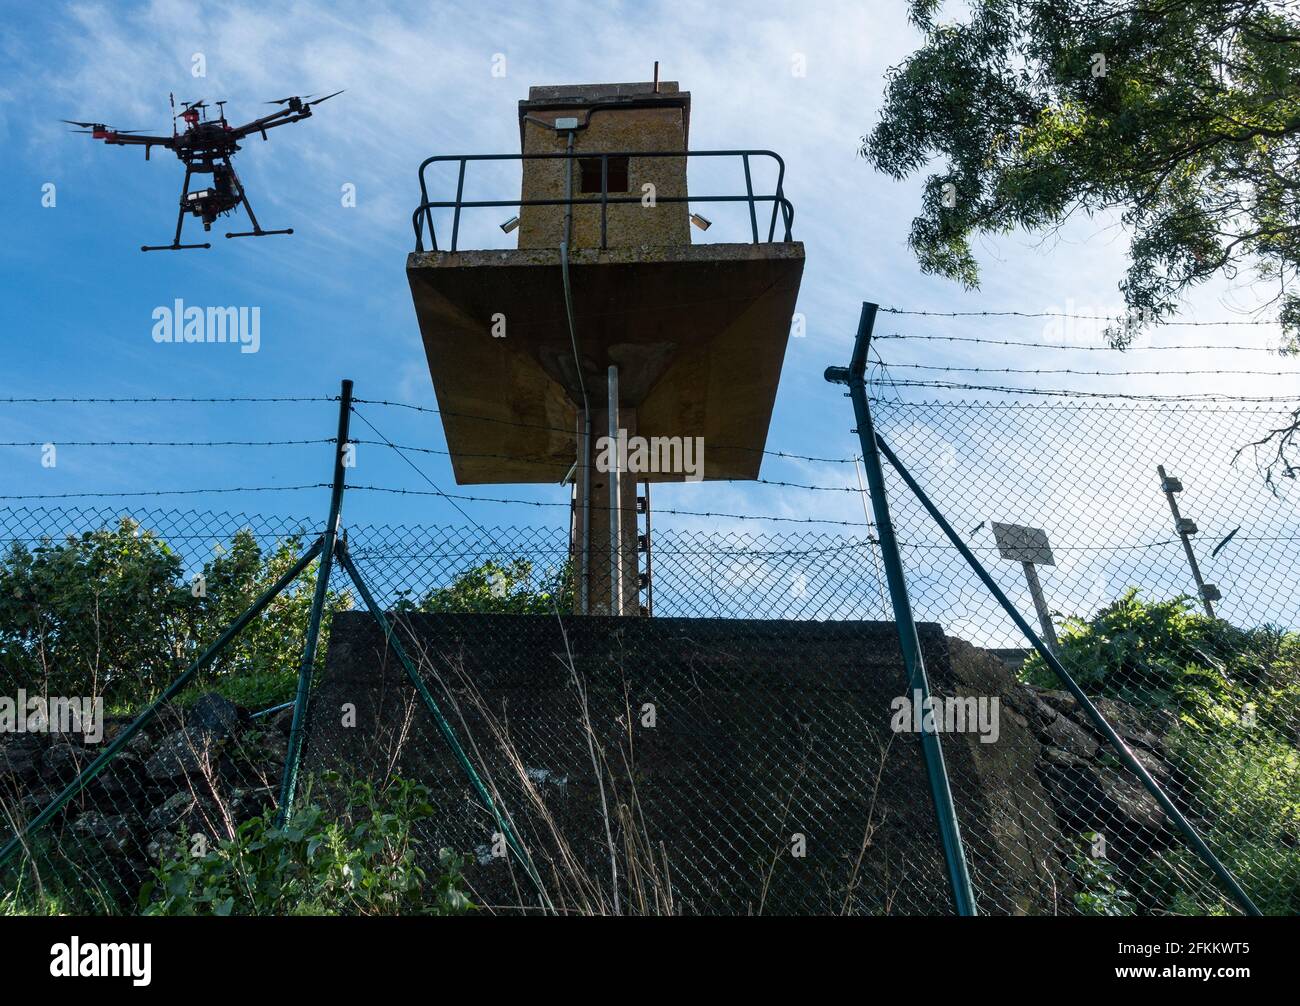 Drone flying above watchtower behind security, razor wire, barbed wire fence. Stock Photo